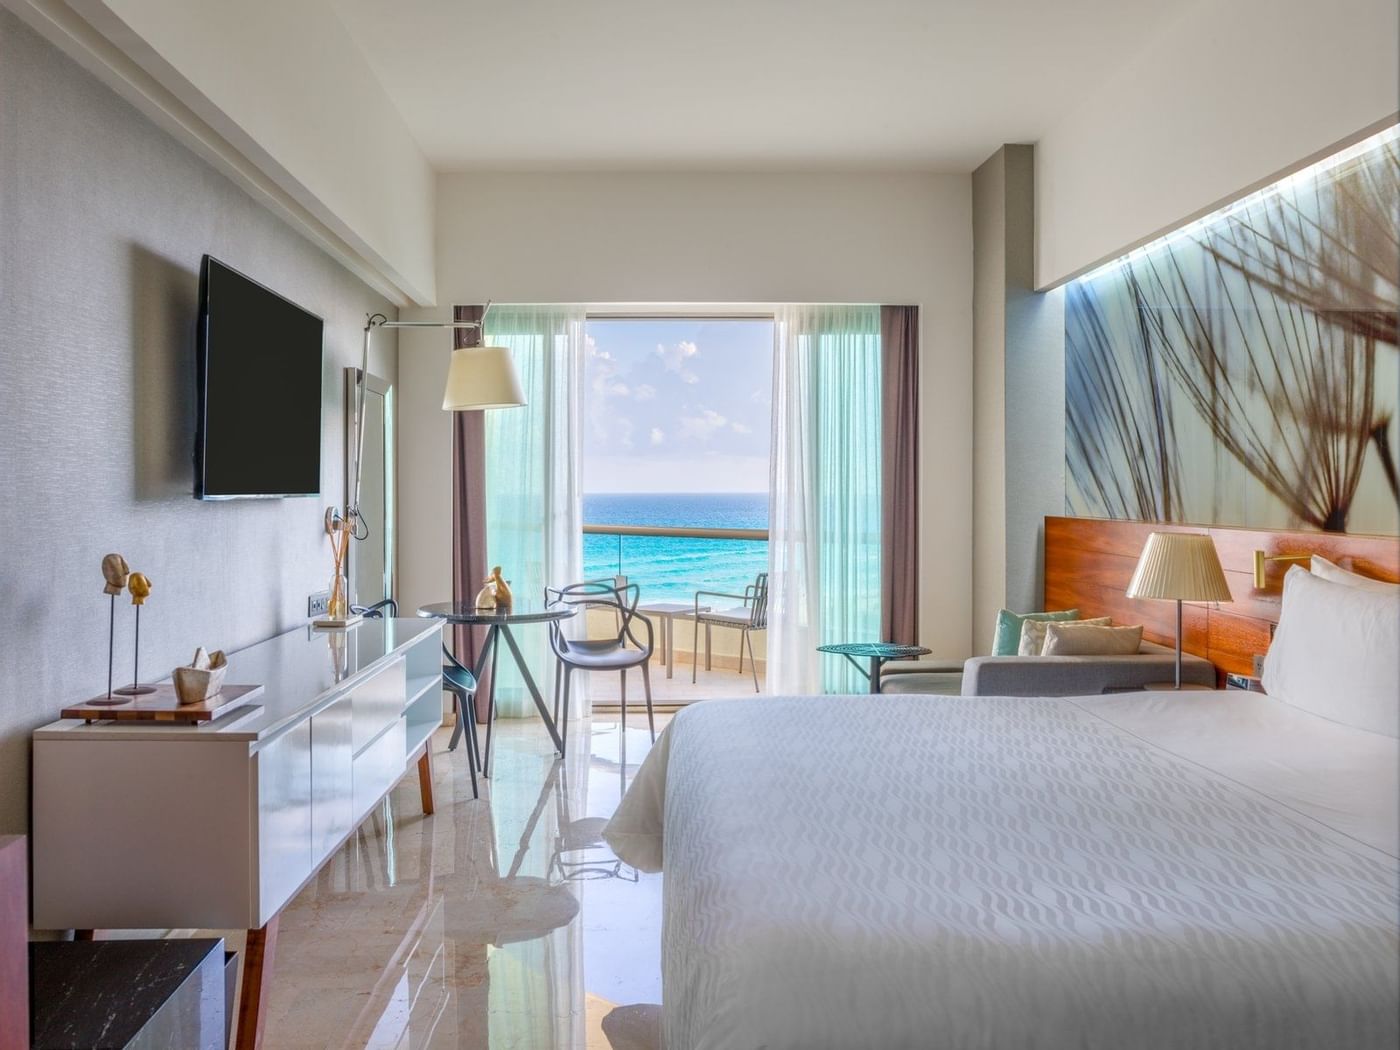 Premium Ocean View with king bed and sitting area faced TV at Live Aqua Beach Resort Cancun